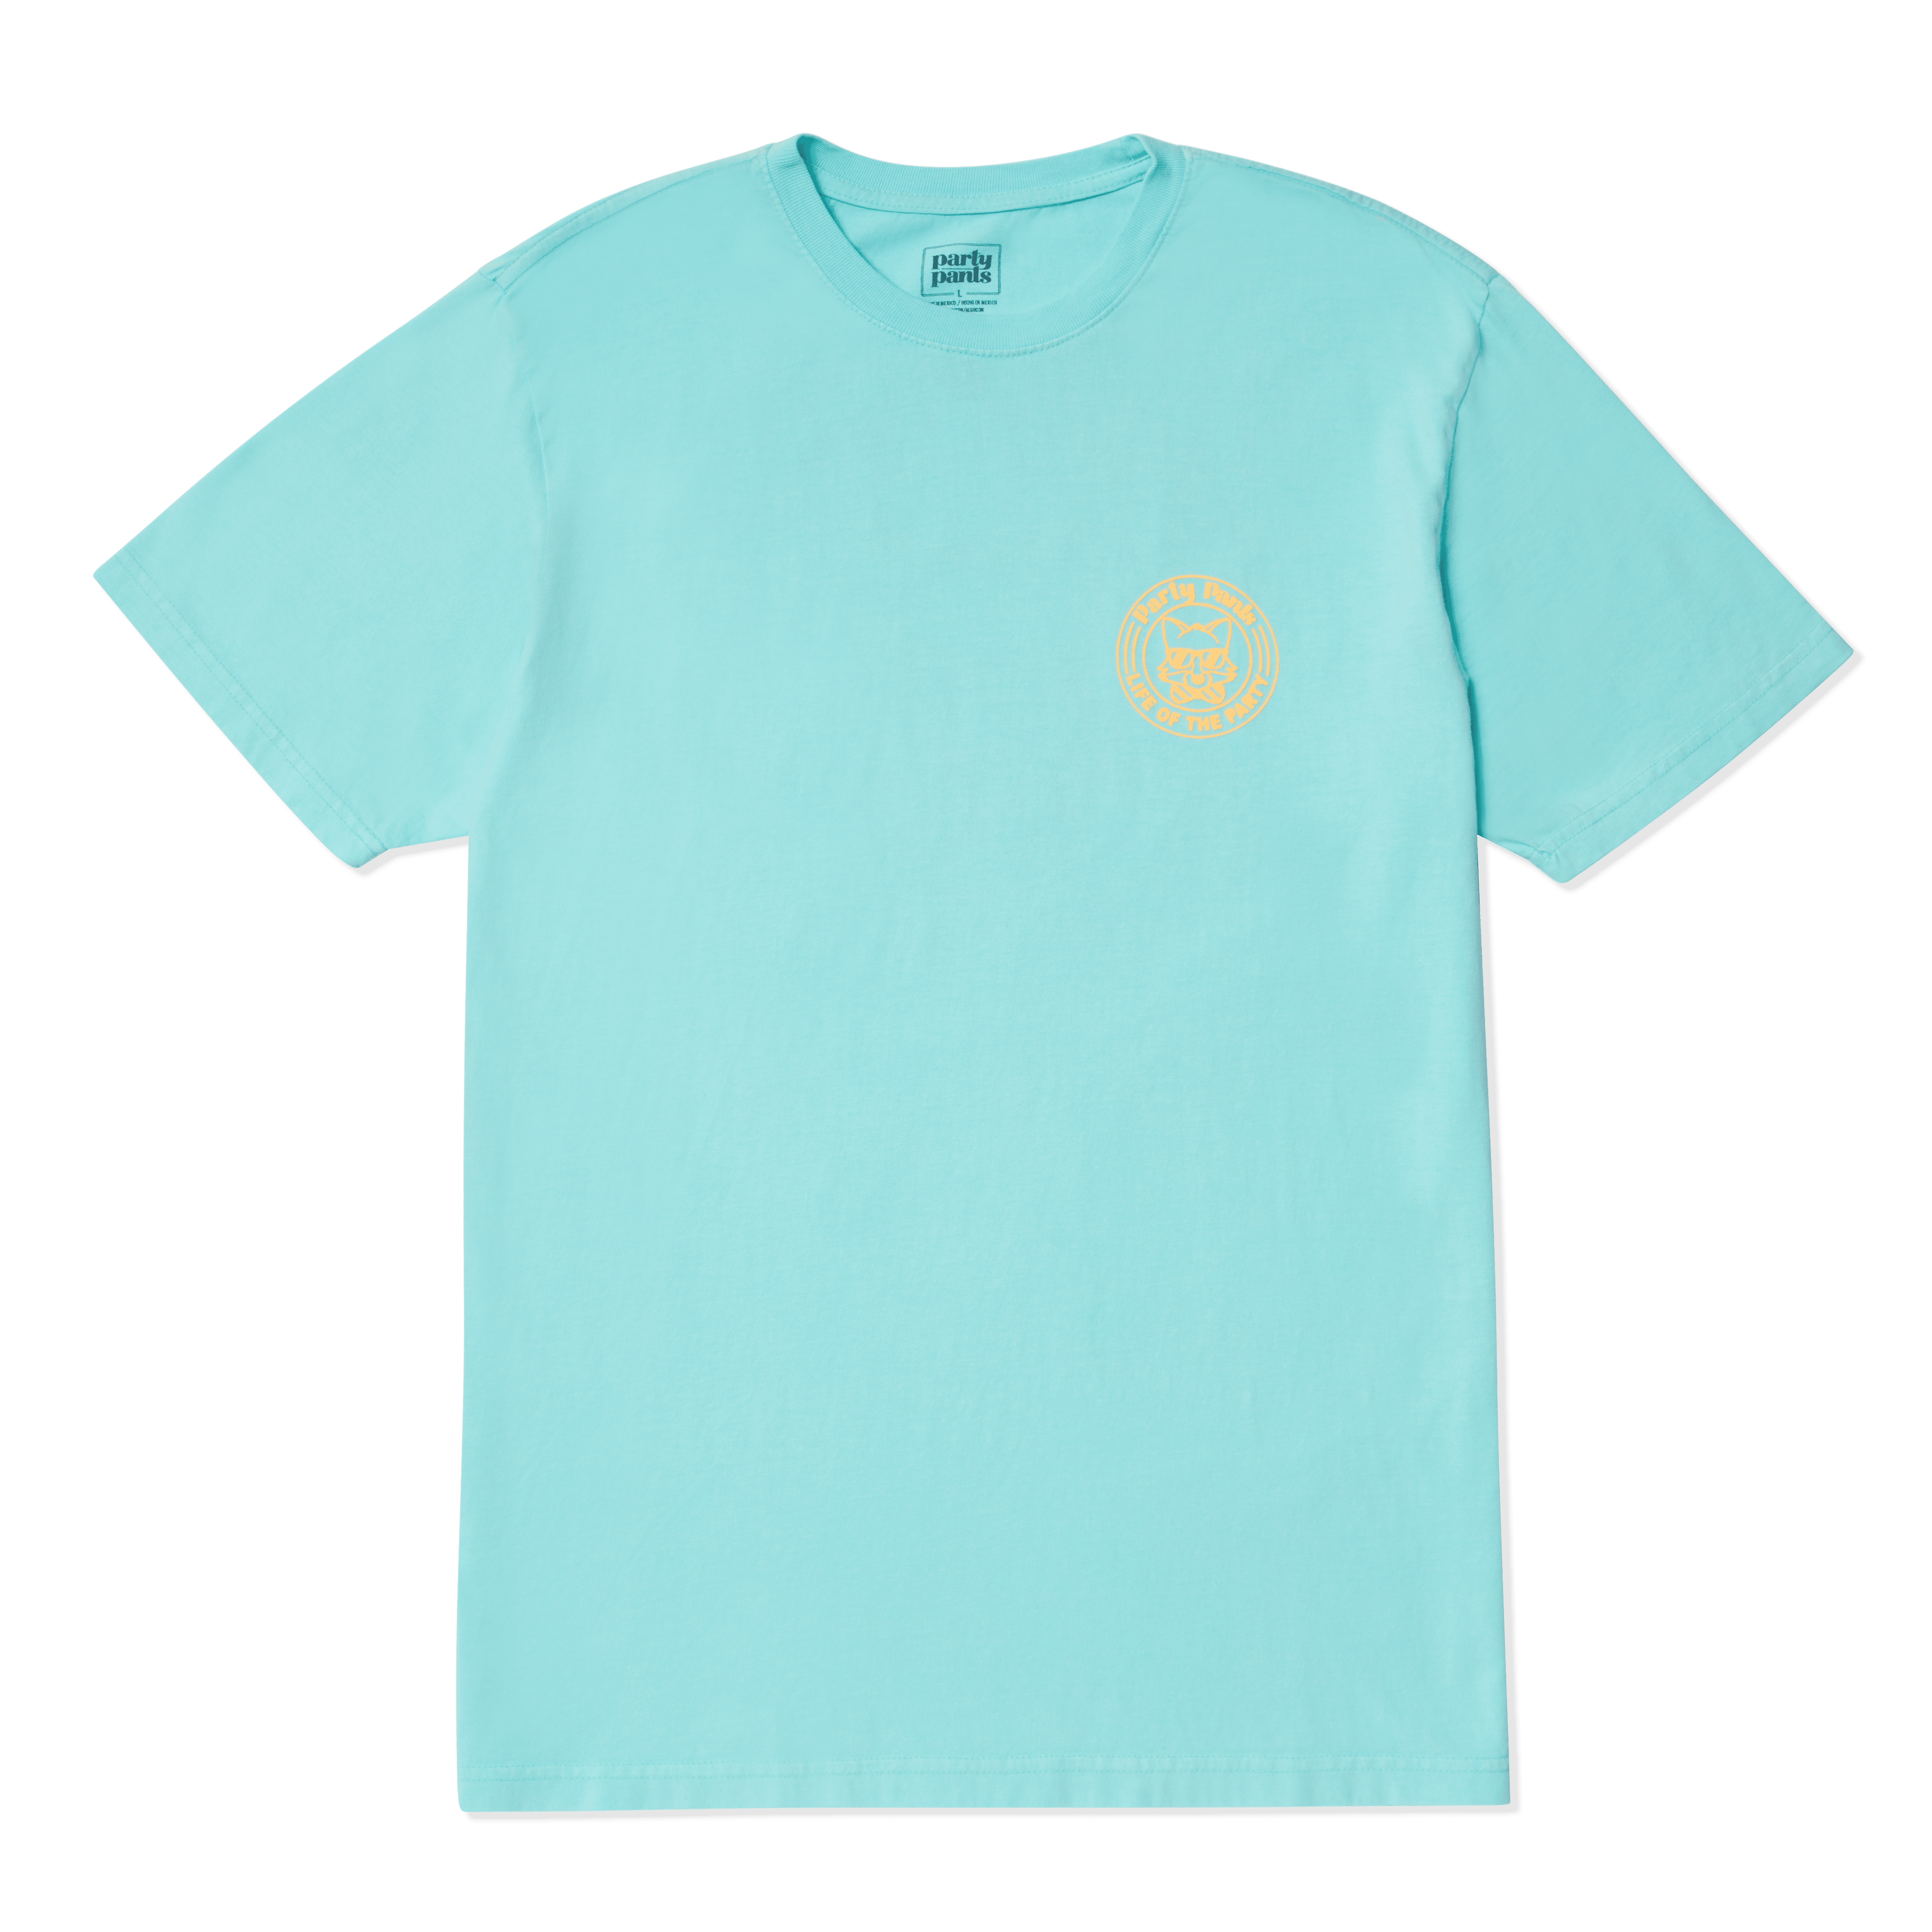 LIFE OF THE PARTY T-SHIRT - MINT TEE PARTY PANTS 